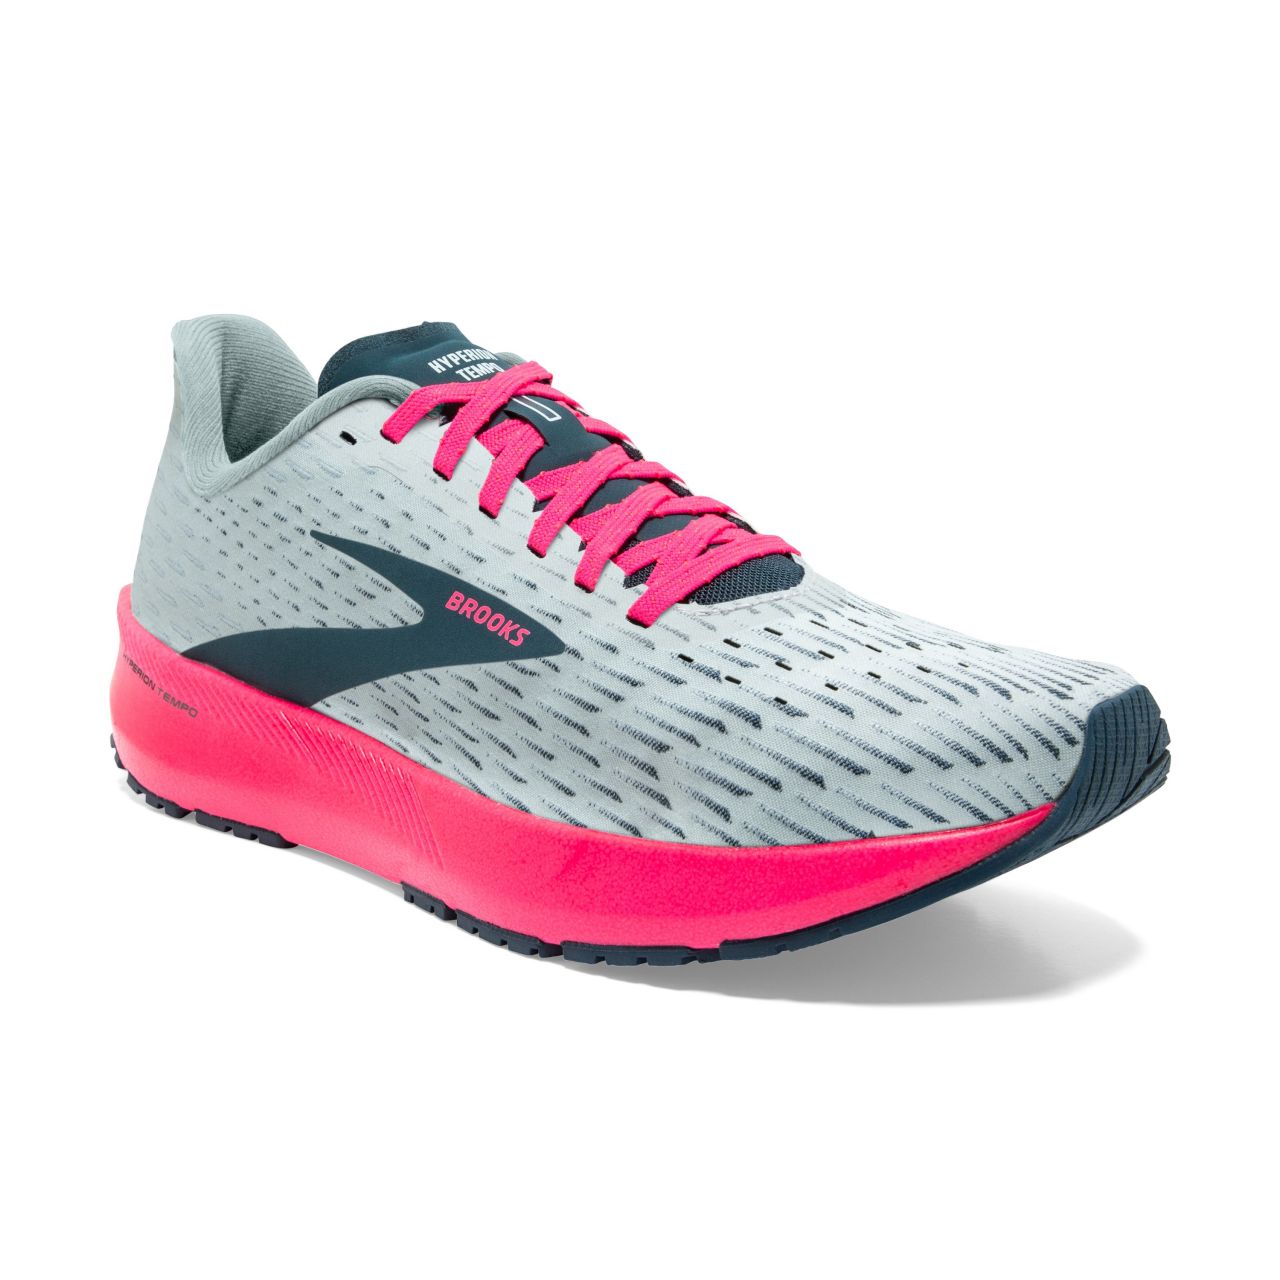 BROOKS HYPERION TEMPO ice flow navy pink  Chaussures de running femme